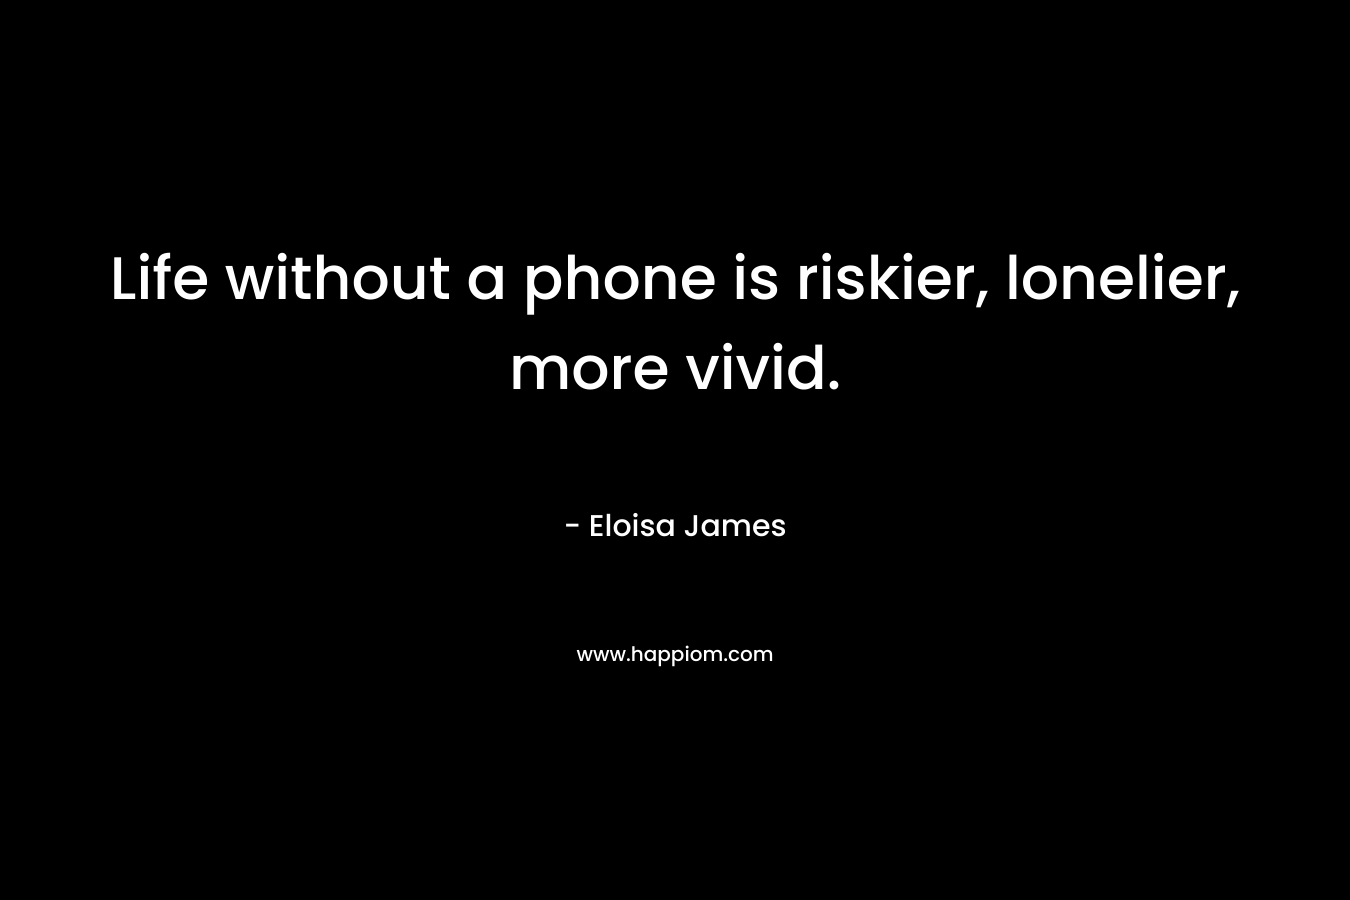 Life without a phone is riskier, lonelier, more vivid.